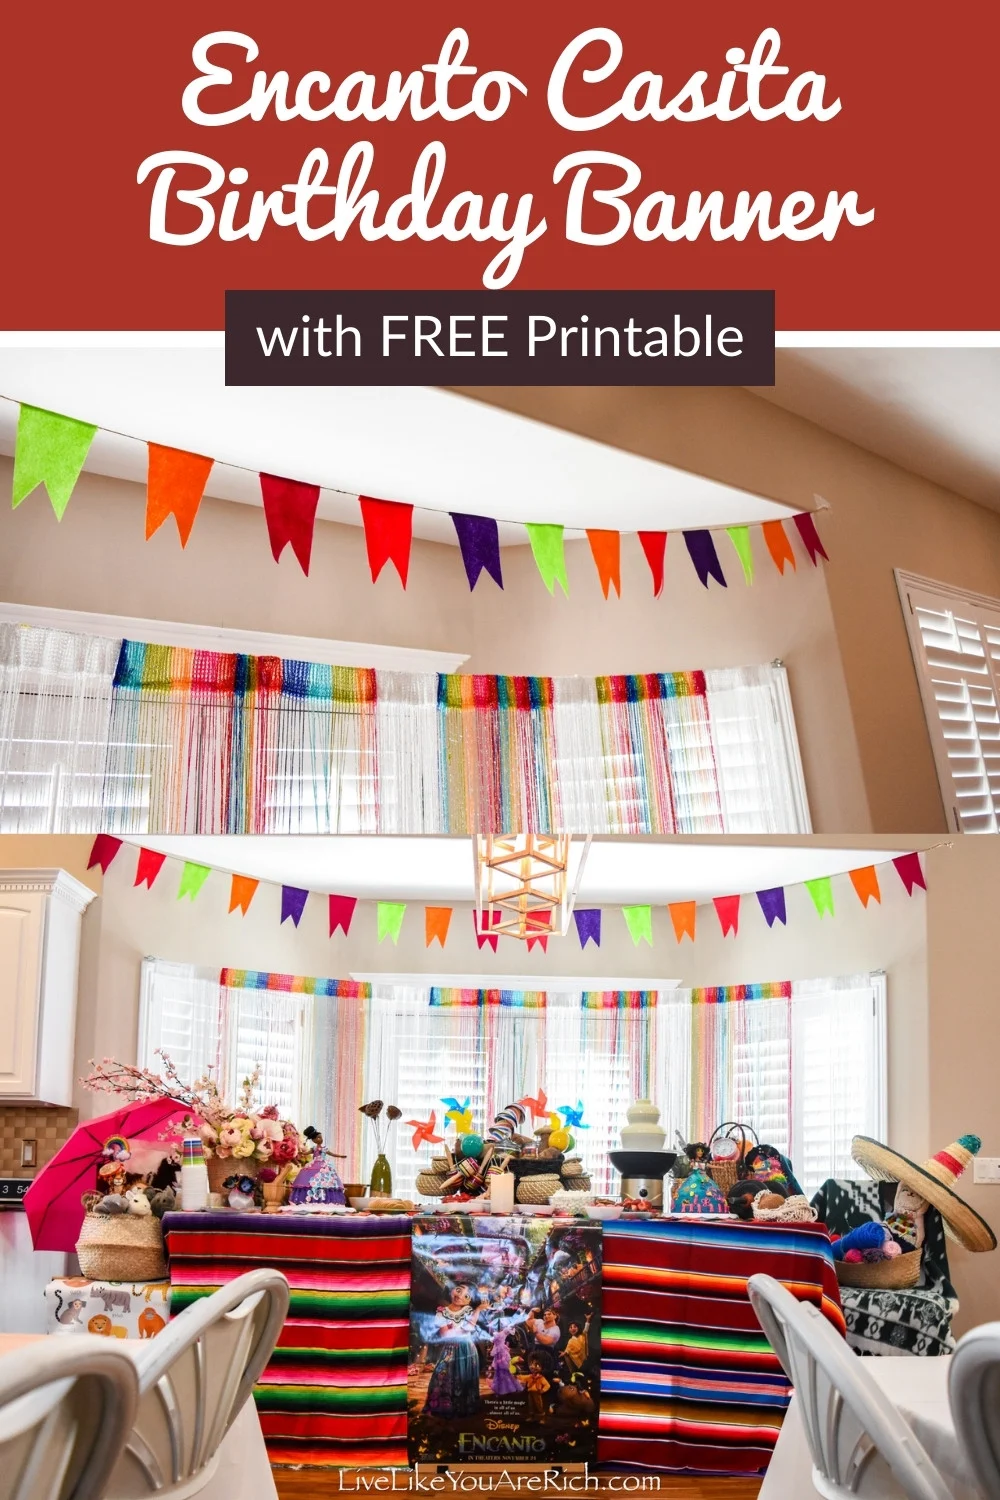 This is a Free Printable and Tutorial on How to Make an Encanto Casita Birthday Banner I made this birthday banner that we saw in Encanto during Antonio’s party.  It was super easy, inexpensive, and came together very quickly.